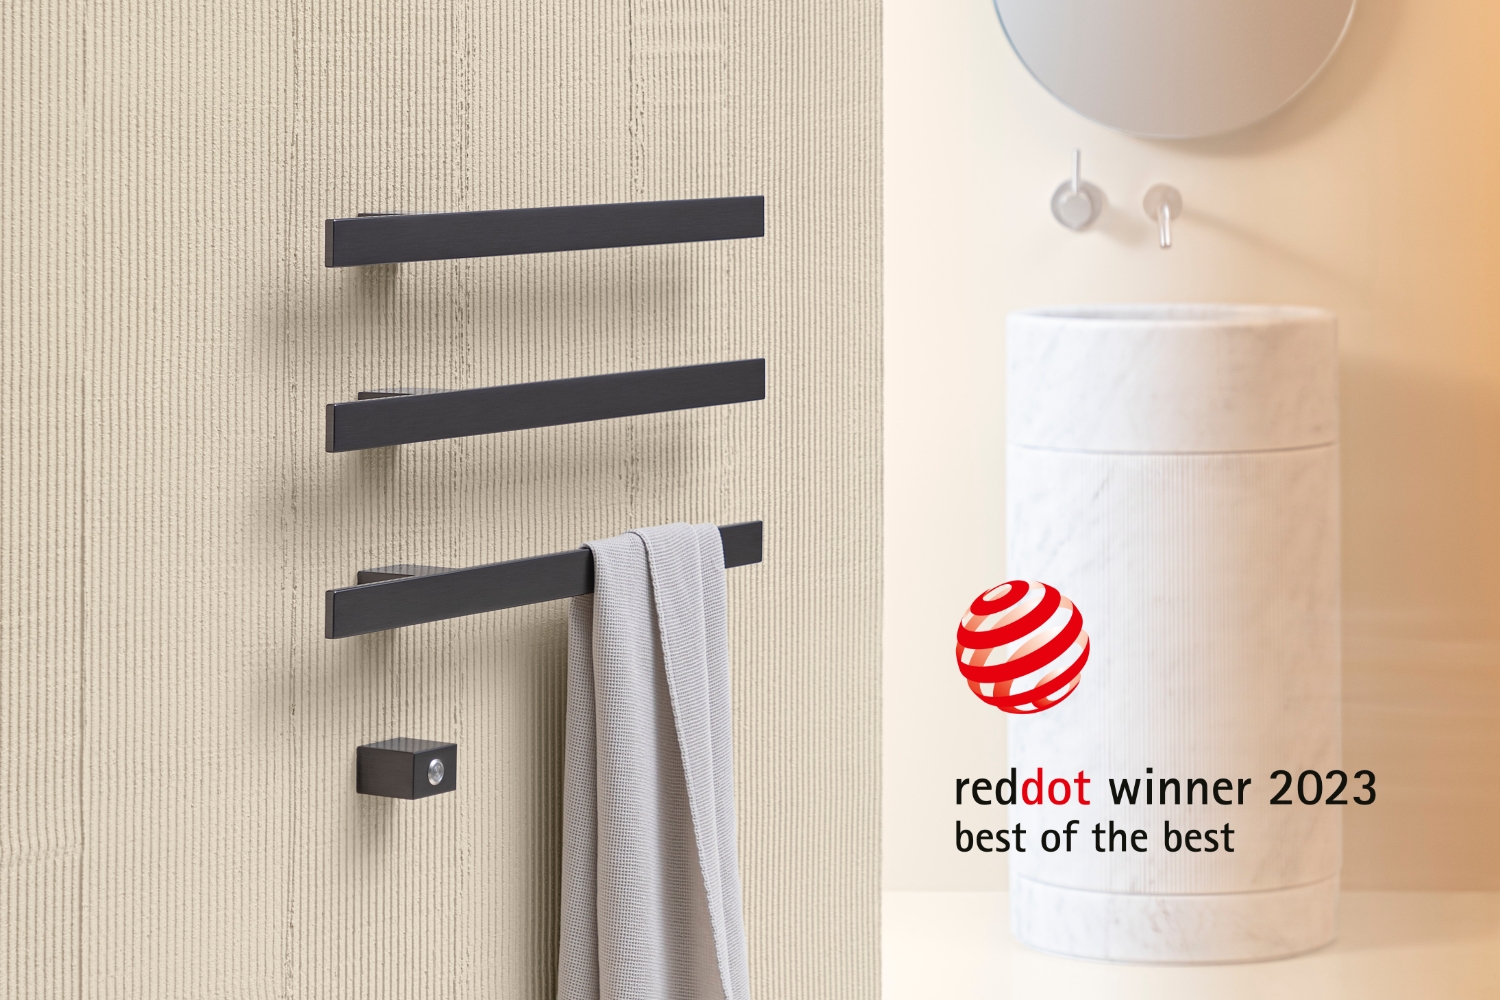 I Ching vince il Red Dot Design Award 2023 Best of the Best-I CHING_TUBES_RED DOT galleru